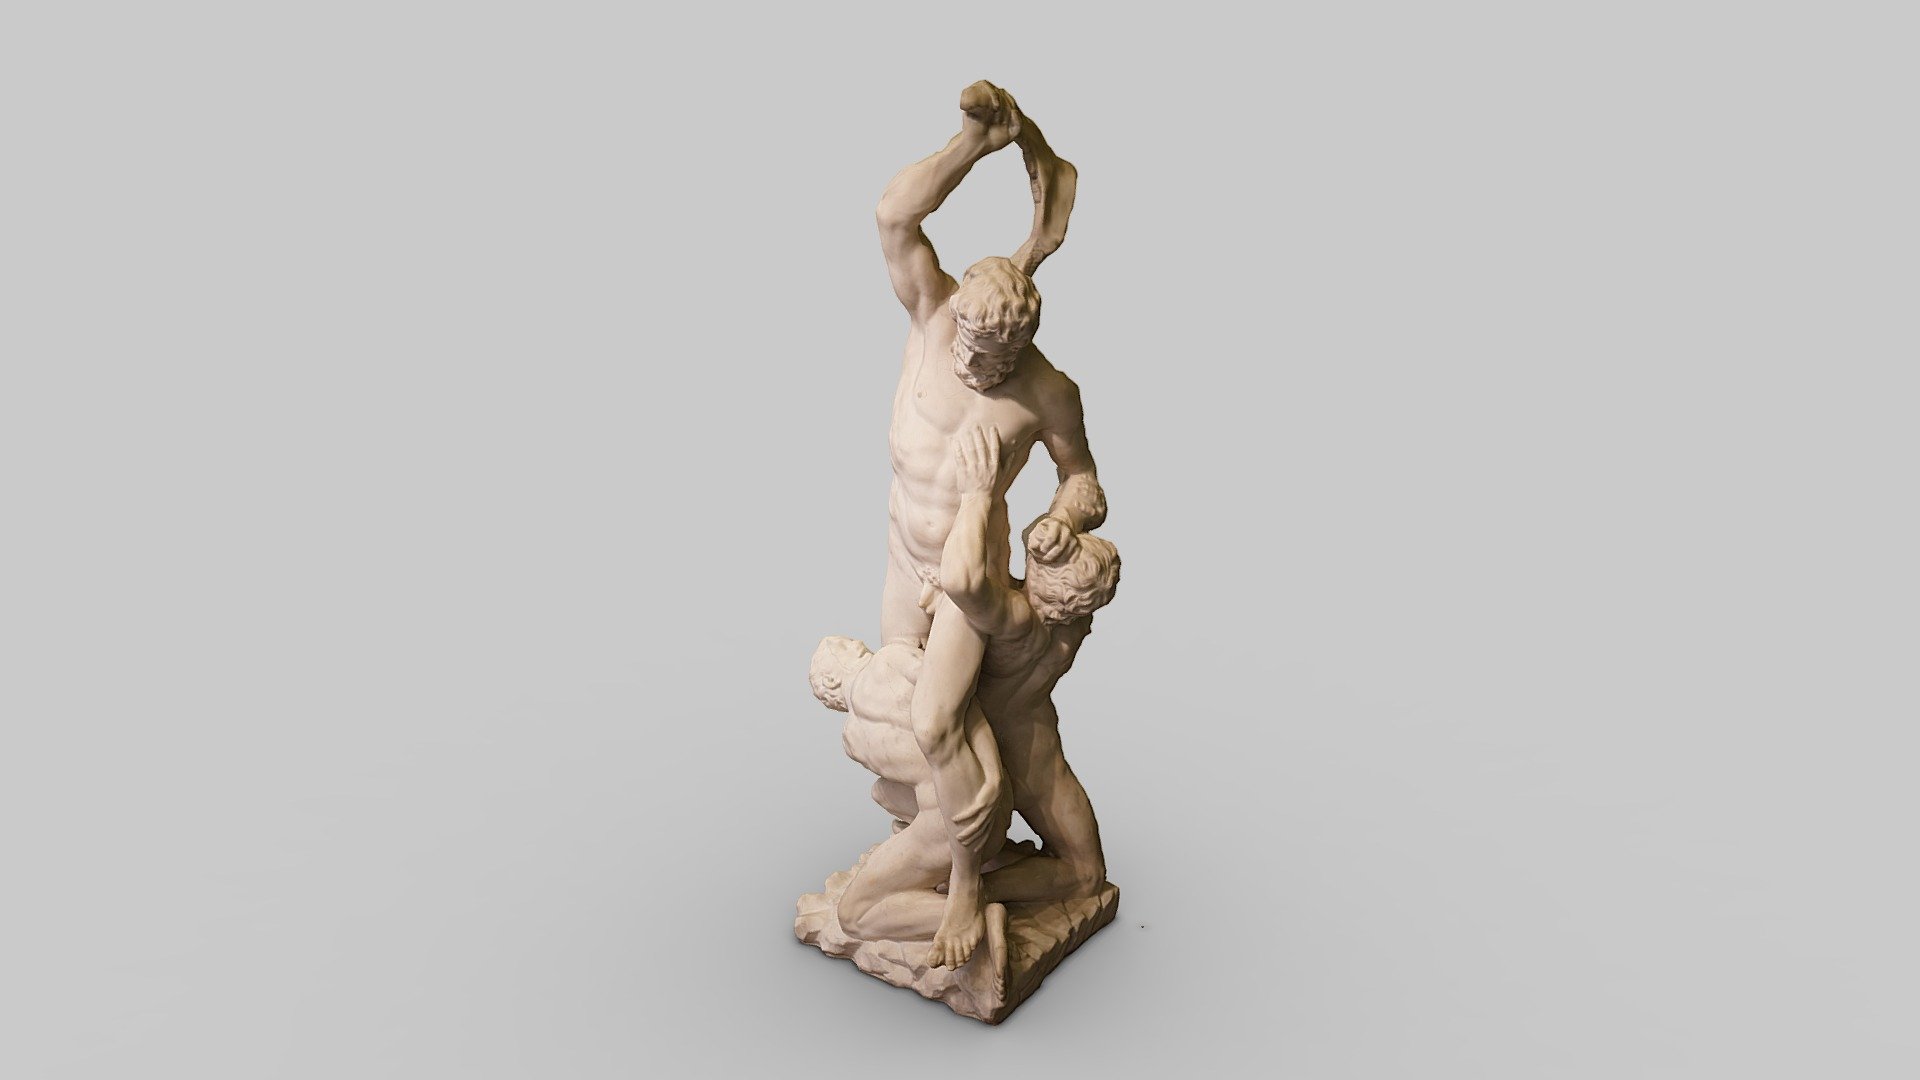 A marble statue of Samson killing two Philistines with a jaw bone. From Florence and now in Sculpture (Room 25), The Victoria and Albert Museum, London.

Date: 1749.

https://collections.vam.ac.uk/item/O94079/samson-and-the-philistines-figure-group-foggini-vincenzo/

171 photos take in November 2022 with a Sony a7R III and processed in Reality Capture 3d model